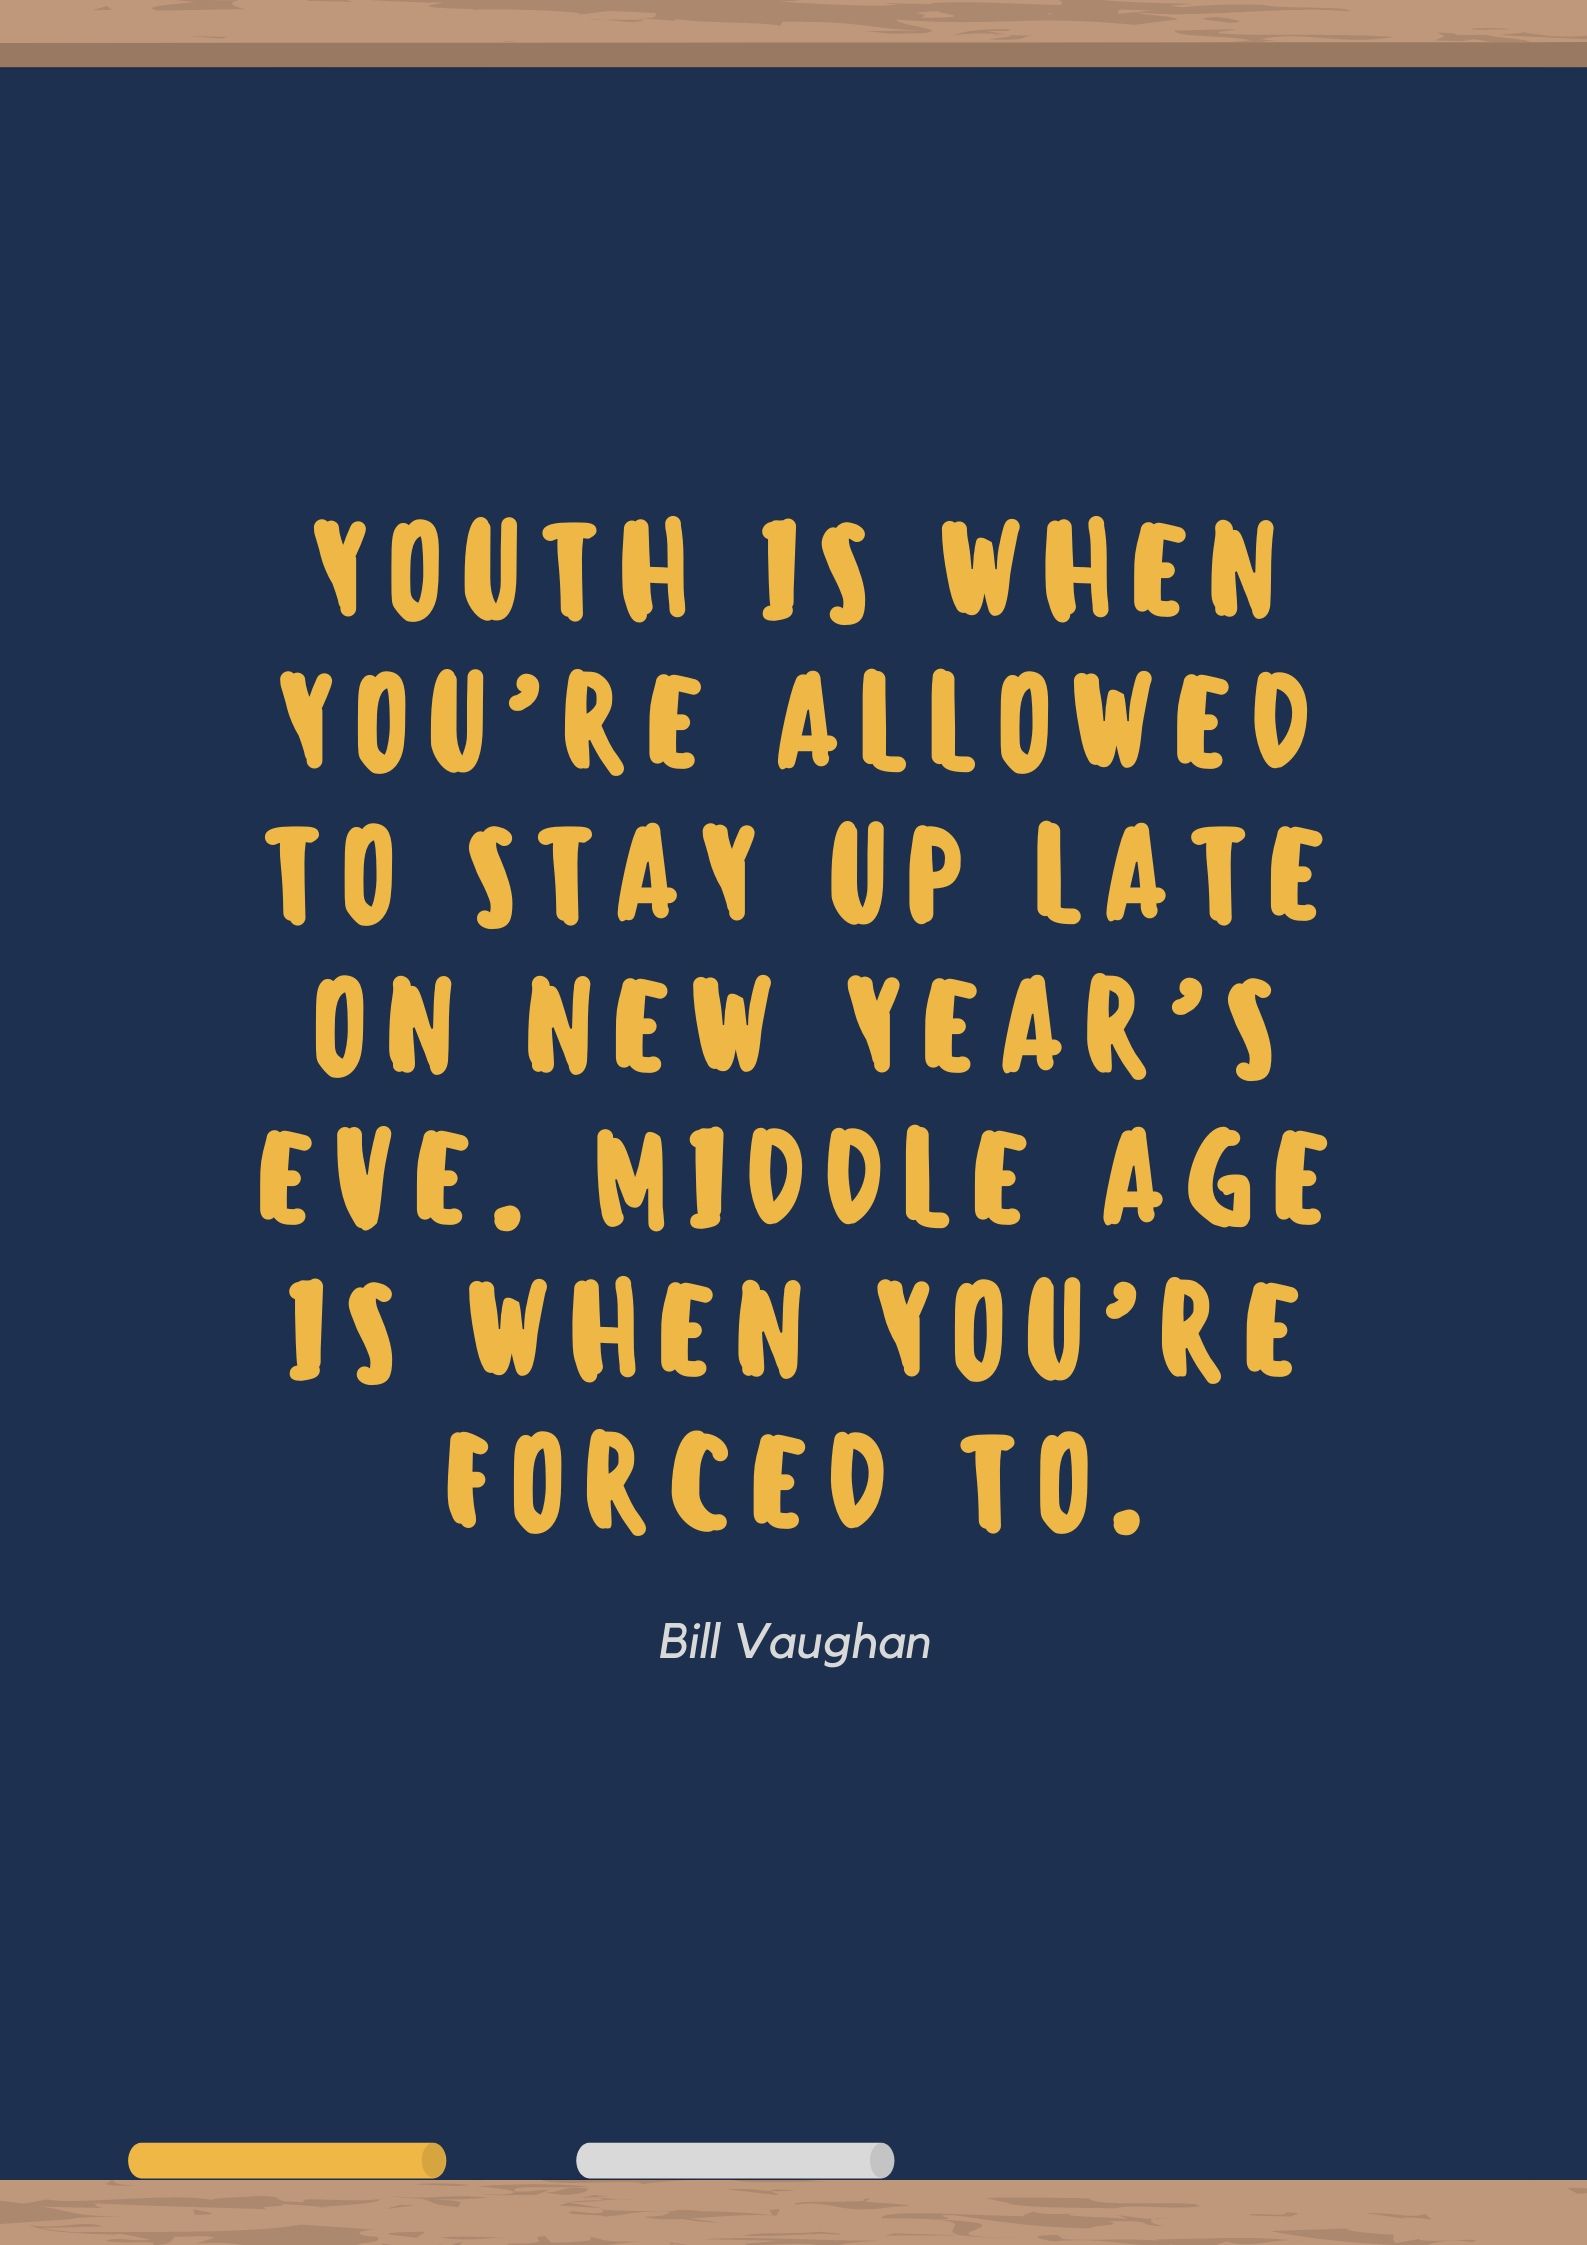 Youth is when you’re allowed to stay up late on New Year’s Eve. Middle age is when you’re forced to.